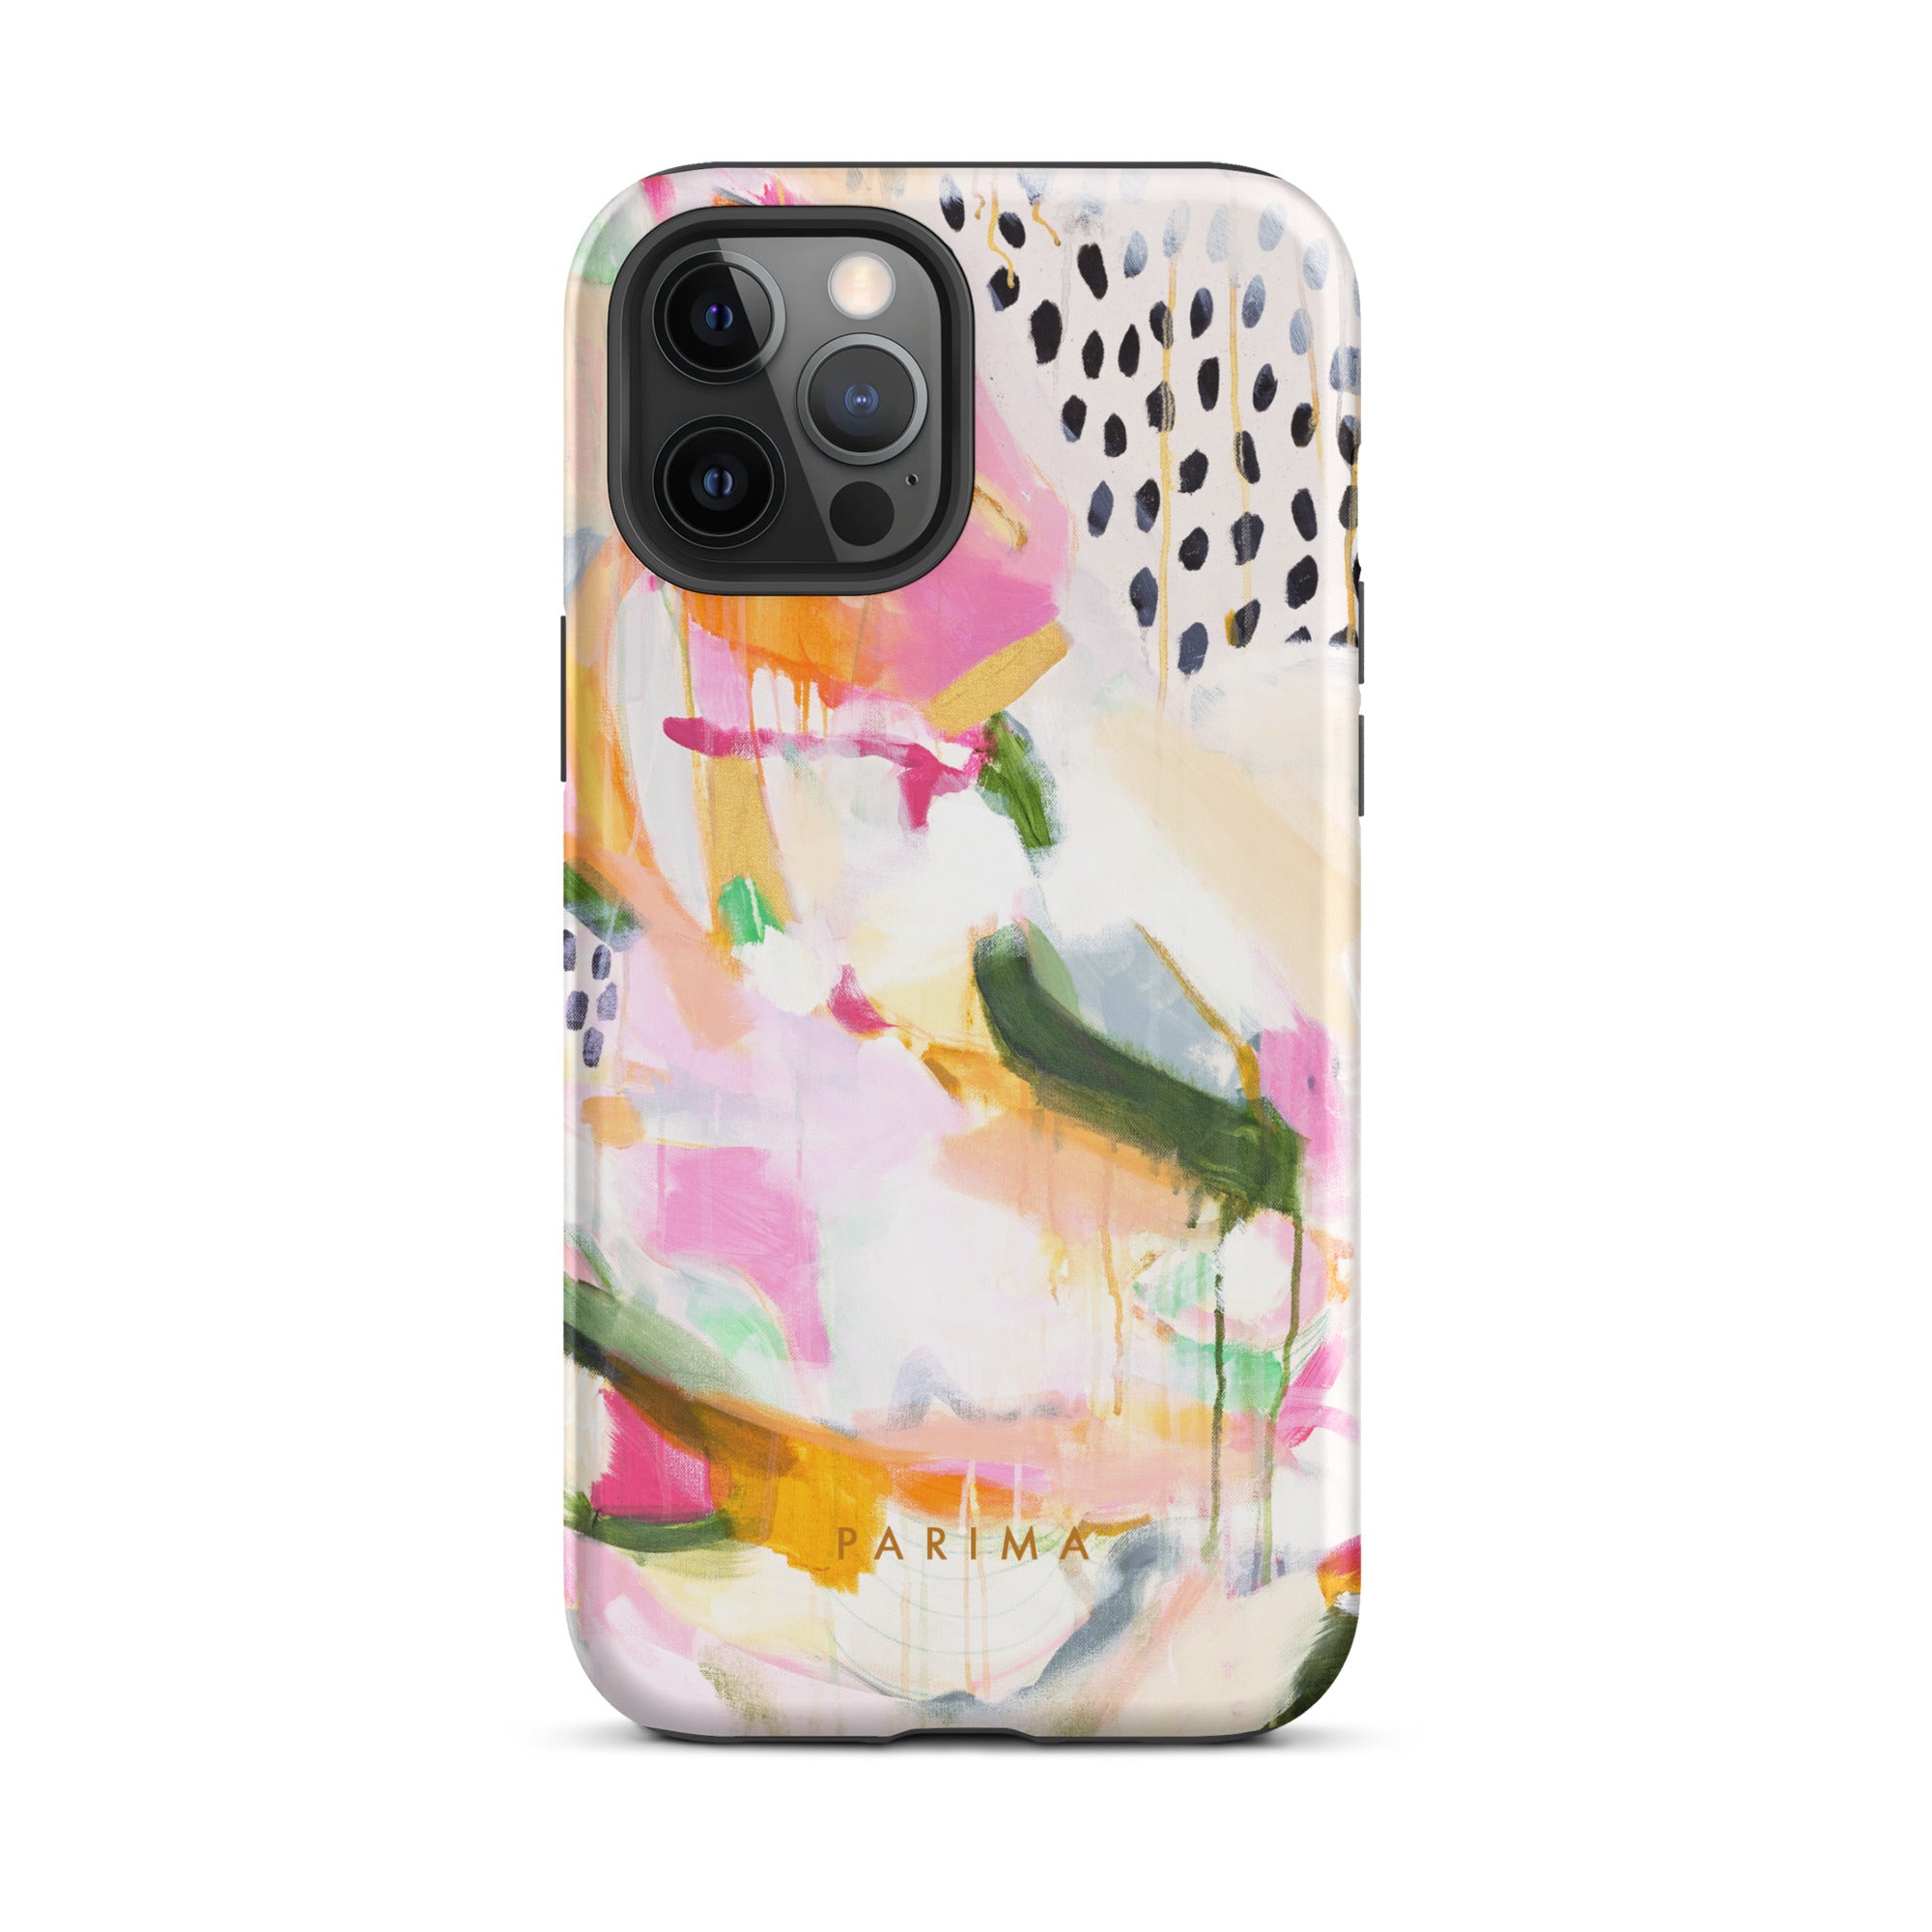 Adira, pink and green abstract art - iPhone 12 Pro Max tough case by Parima Studio